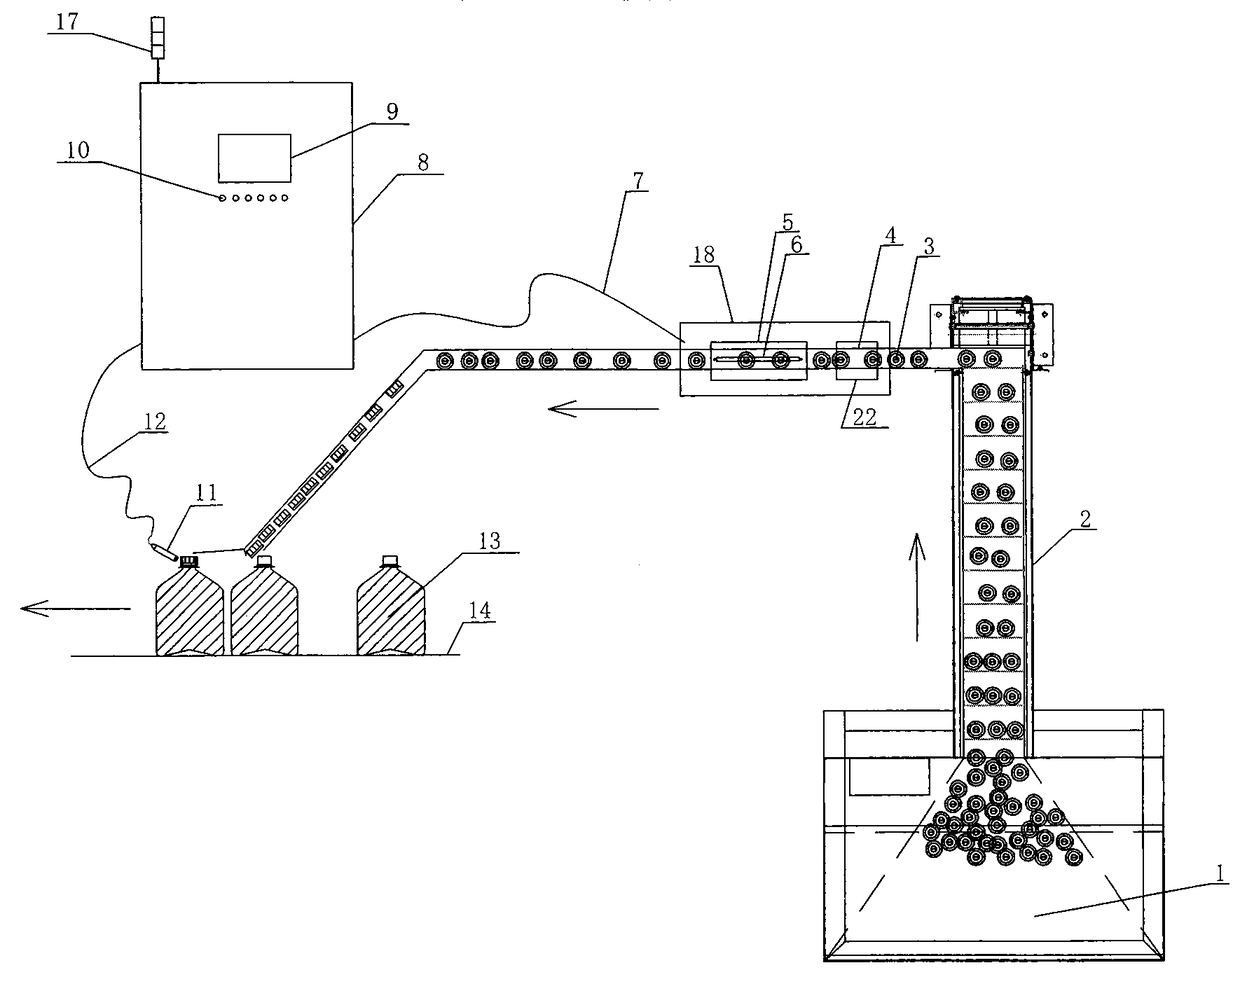 Method for sterilizing drinking water packing material by using pulse sterilization technology